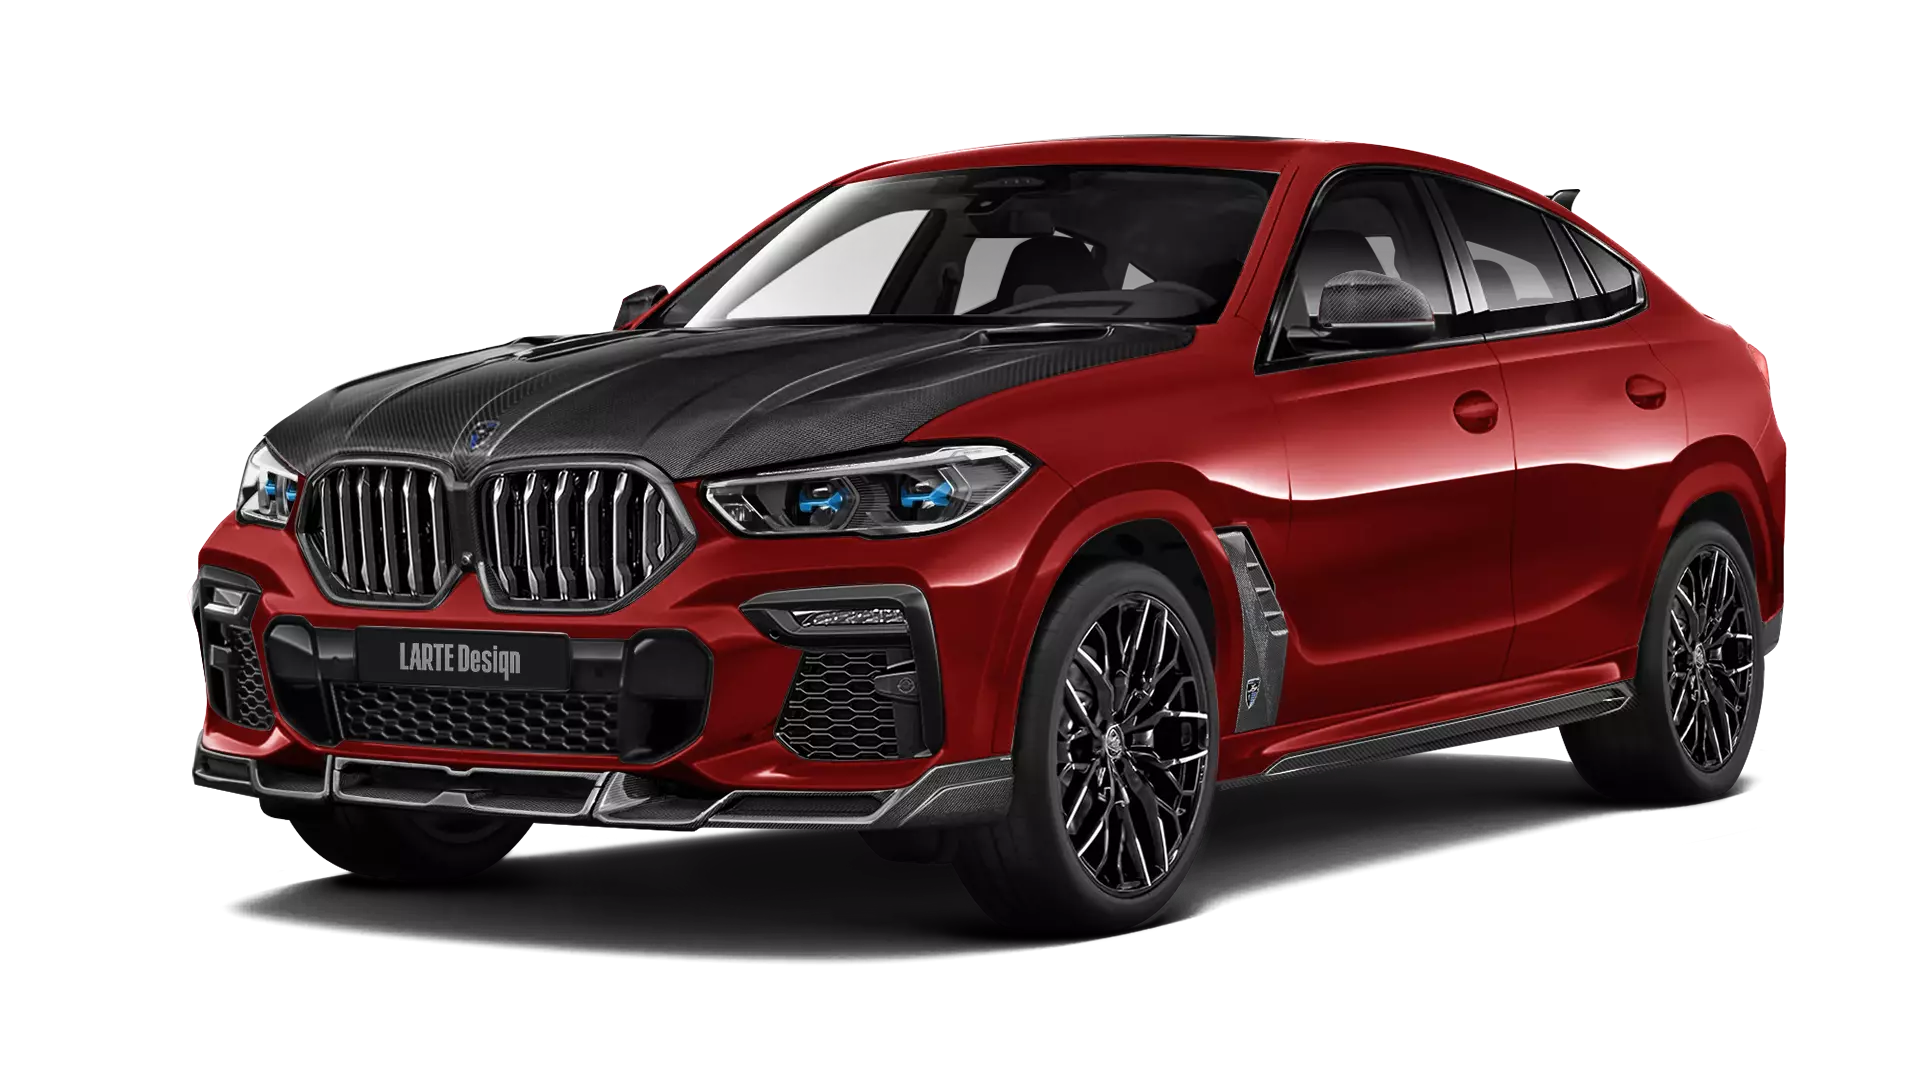 BMW X6 with carbon body kit: front view shown in flamenco red